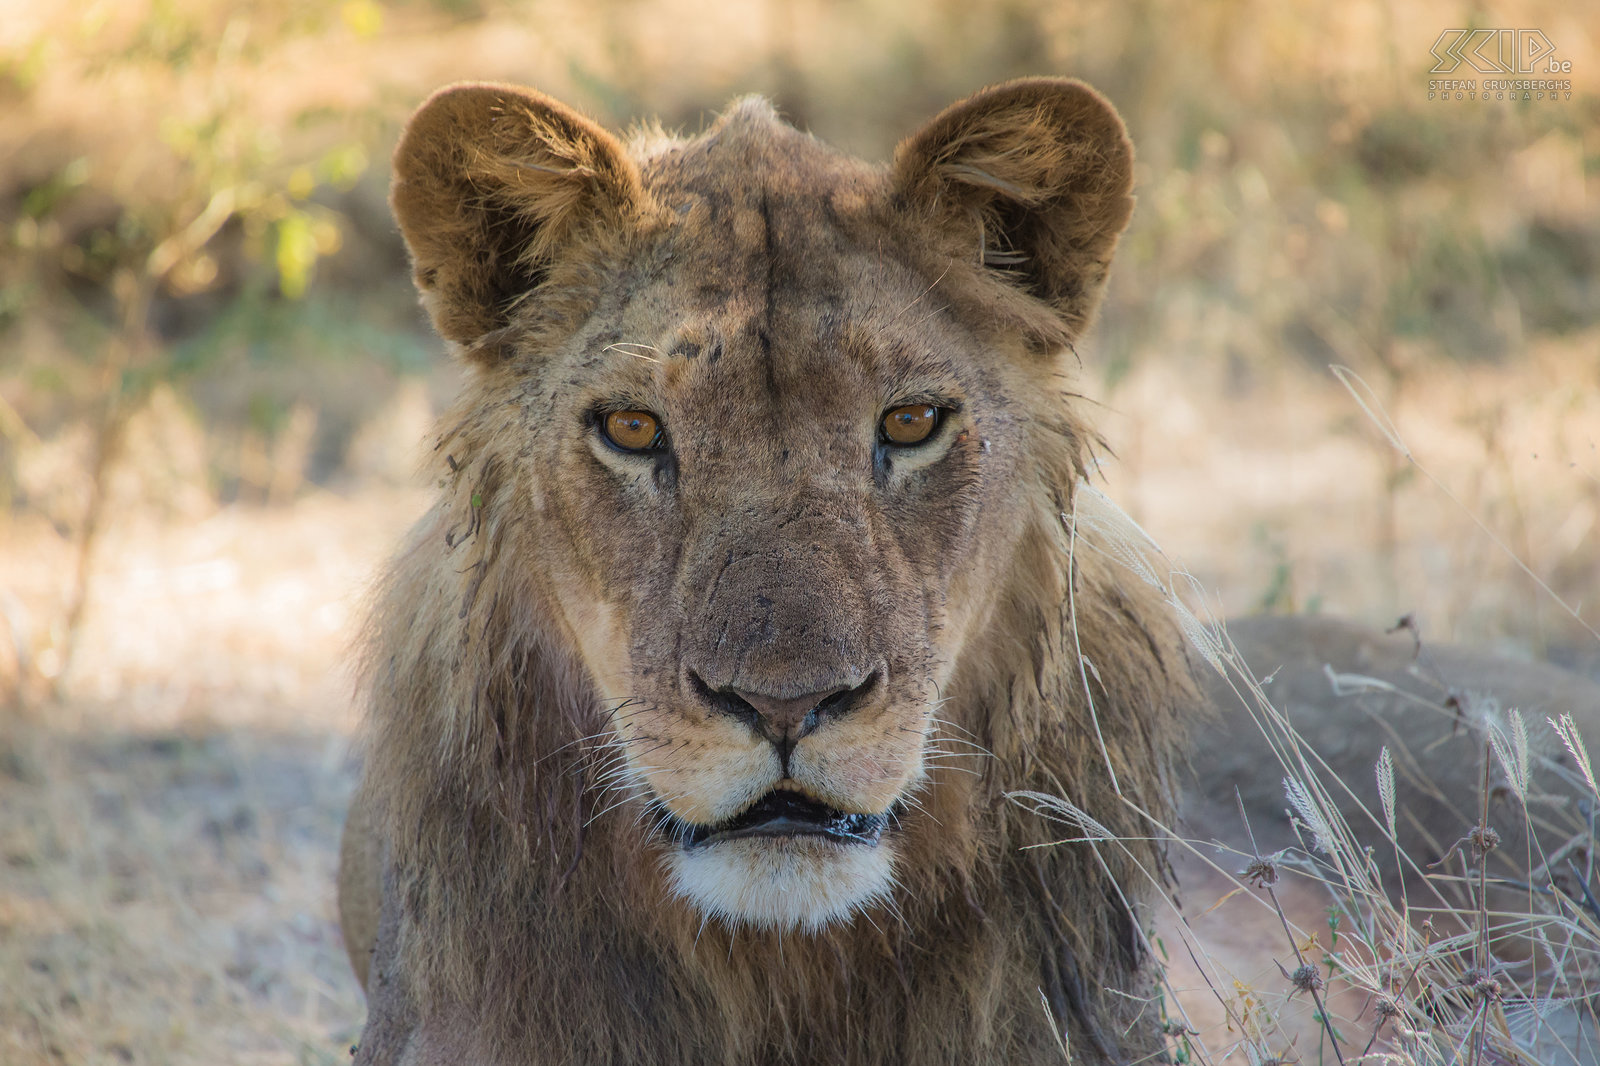 South Luangwa - Lion Every morning and afternoon we made a game drive with our very good guide. Every day we had a lot of luck with our sightings. On our first day we spotted a couple of lions and another pride of 4 males that had come into each other's territory. Stefan Cruysberghs